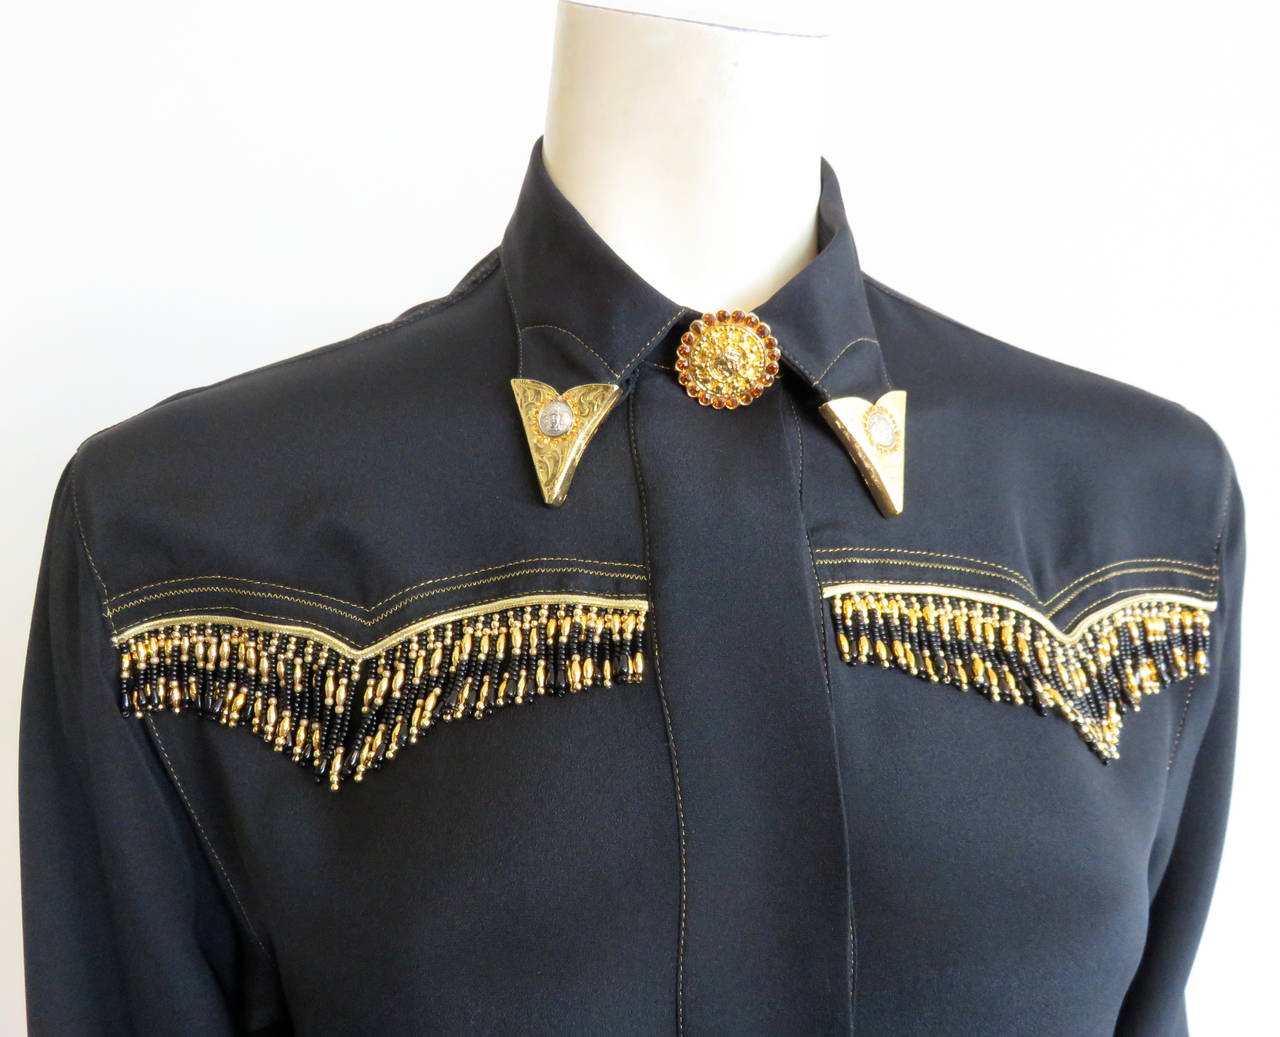 Excellent condition, 1992 GIANNI VERSACE COUTURE, beaded, silk western-style shirt.

Pure, black, silk fabrication with incredible, 'Medusa' logo engraved, metal hardware, collar tips encircled with mini genuine crystals.

Oversized, dazzling,